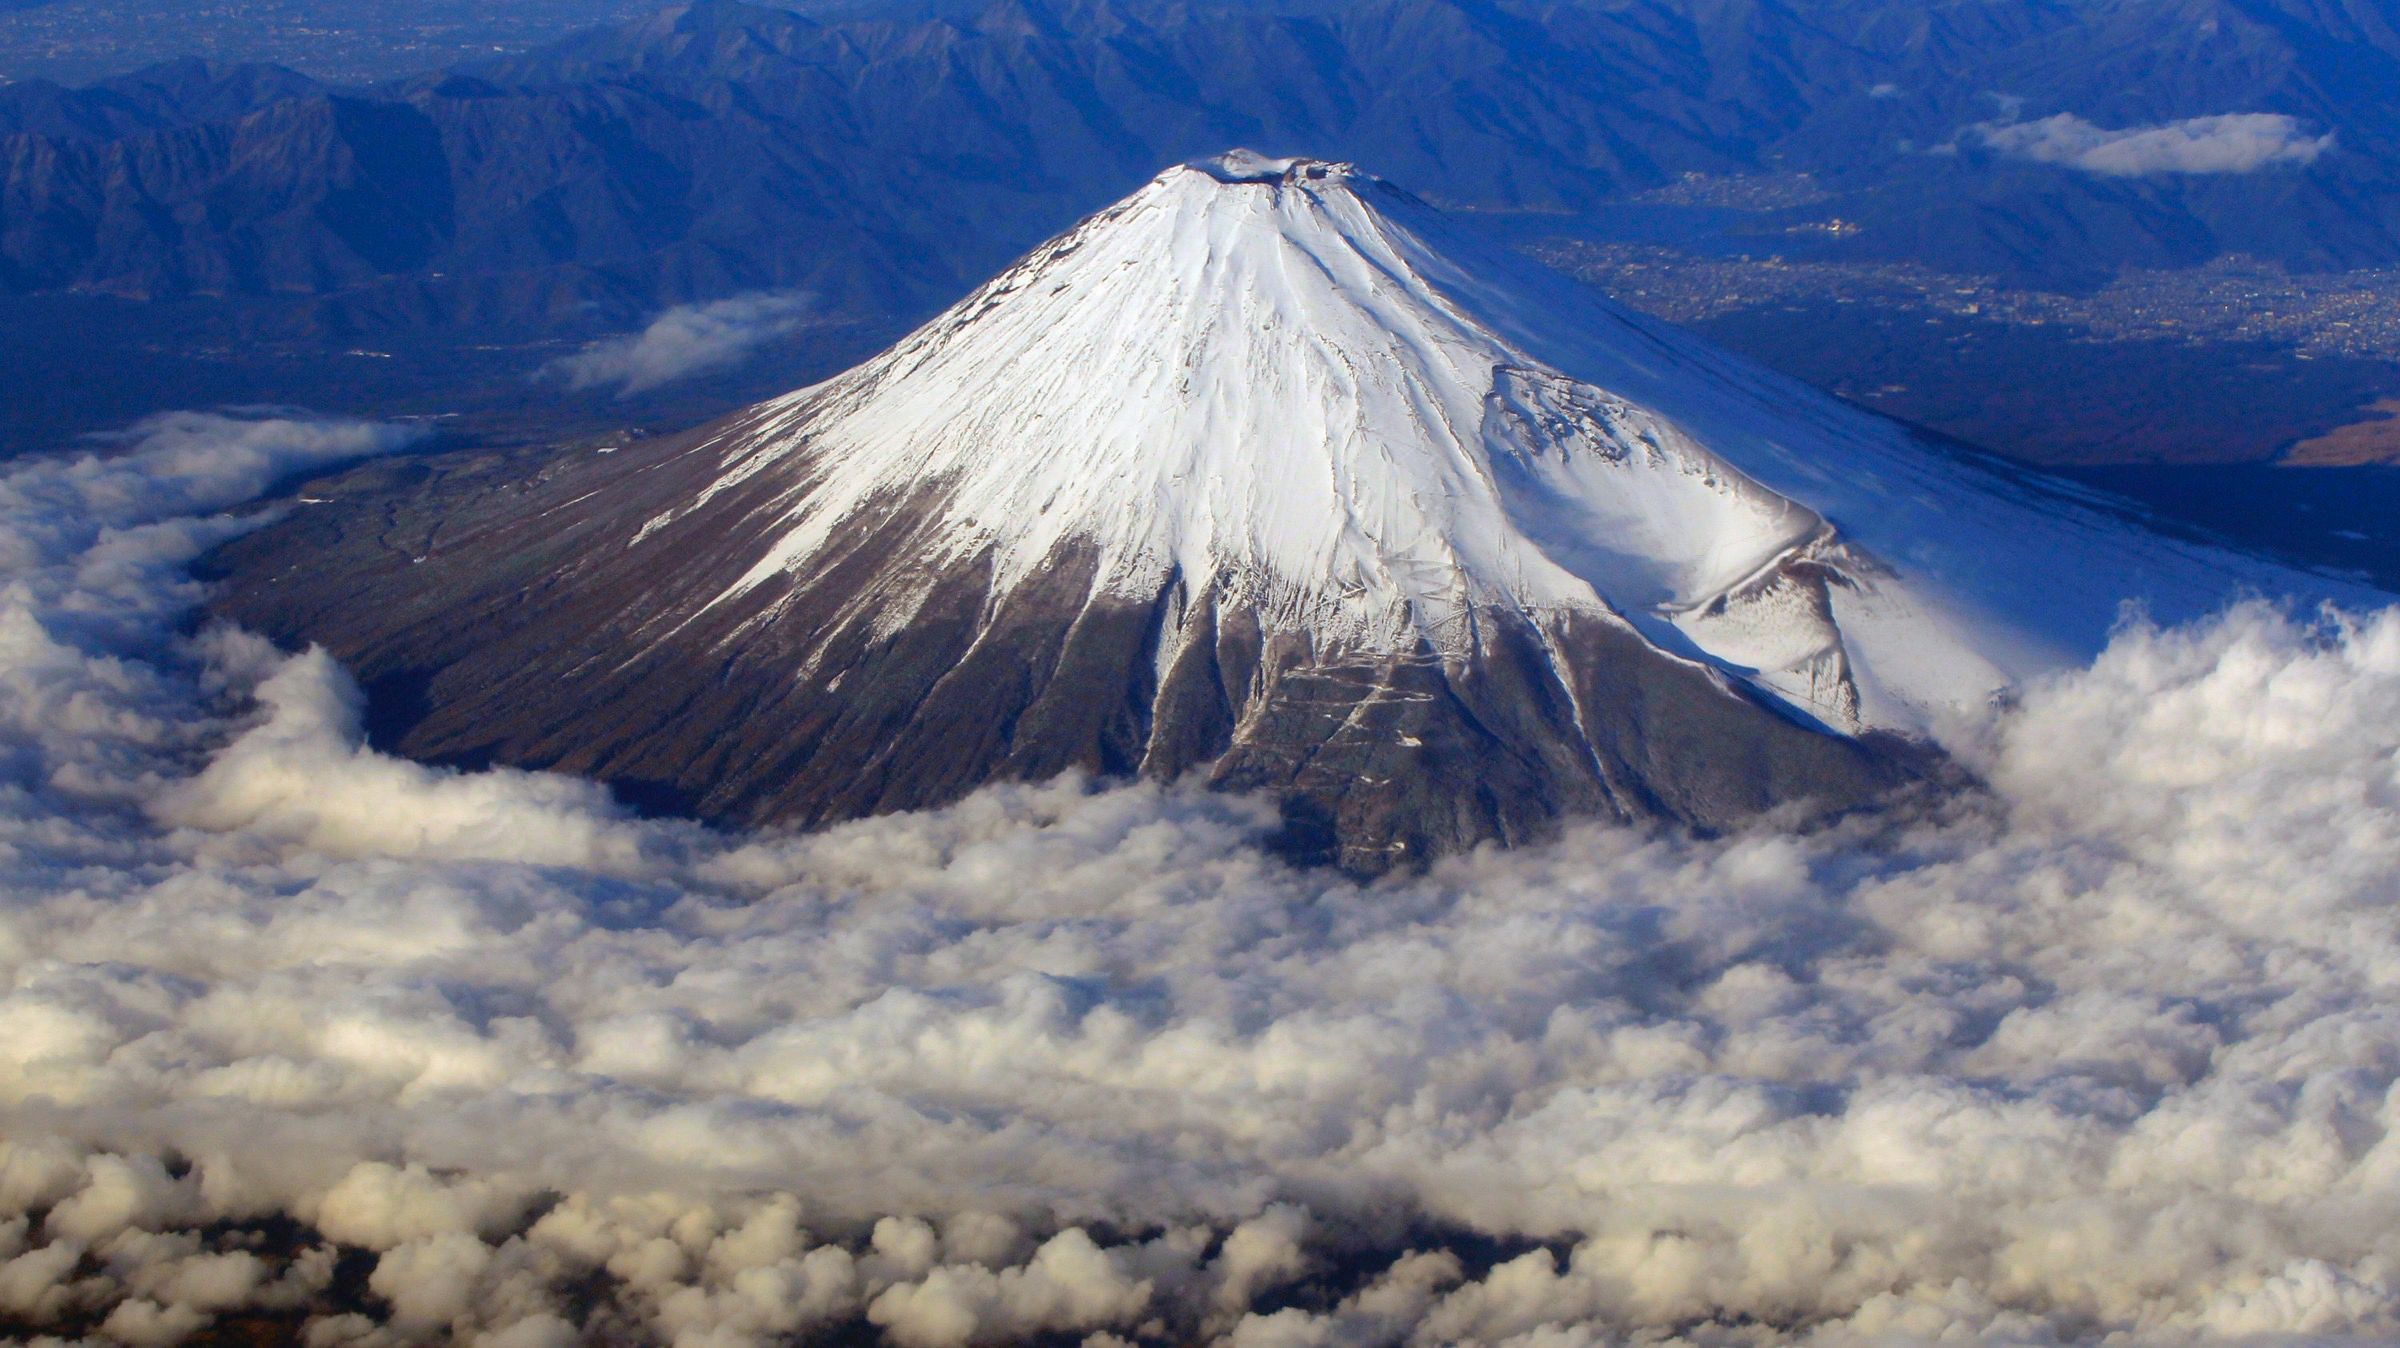 Japan is covering Mount Fuji with free Wi-Fi — Quartz